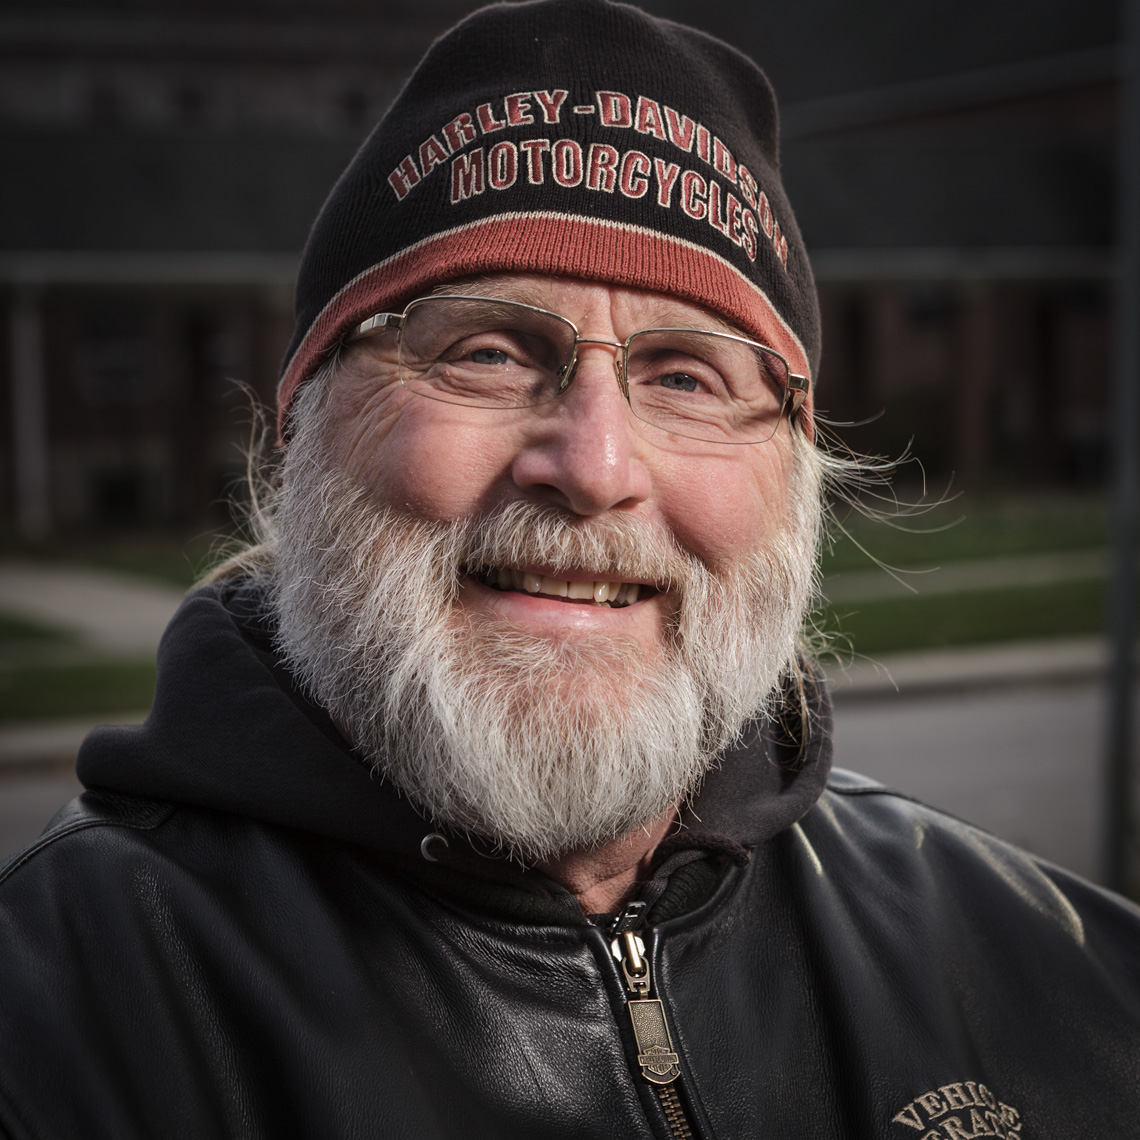 Bearded man with Harley Davidson Hat smiling.